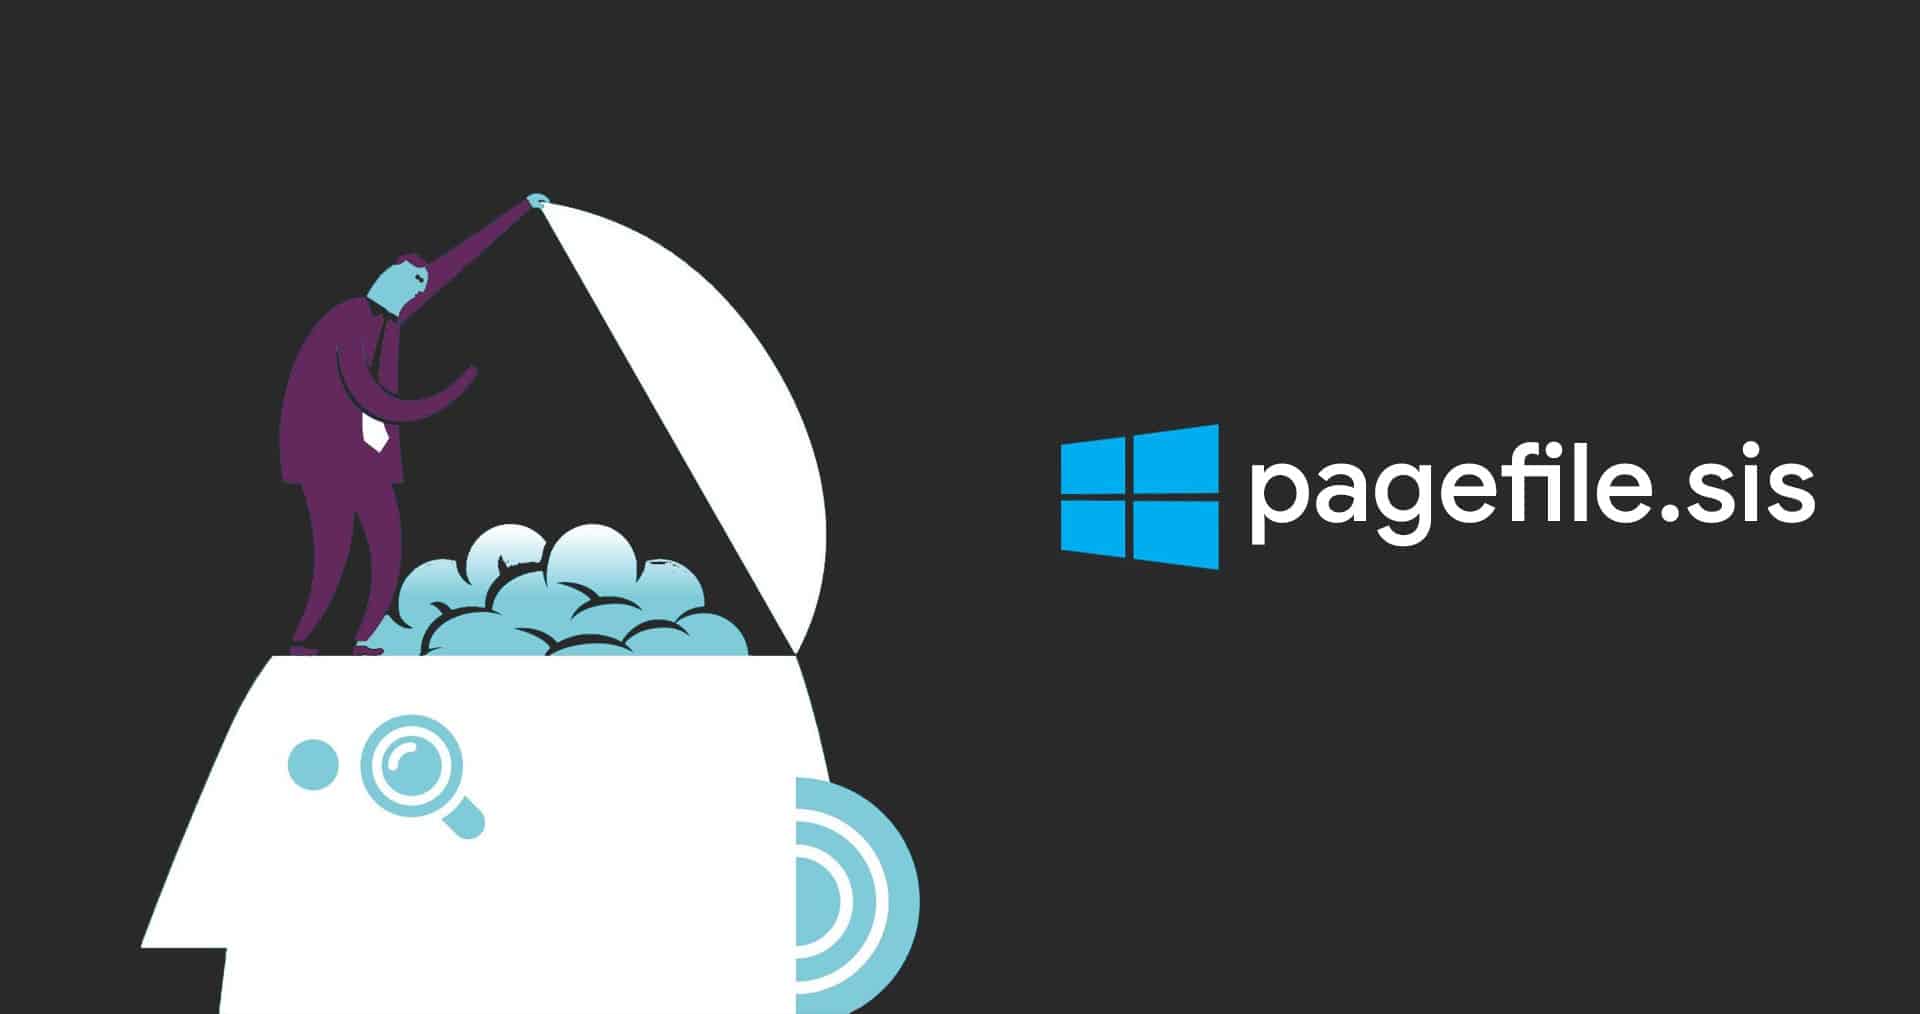 What is Windows Pagefile.sys and how to delete it